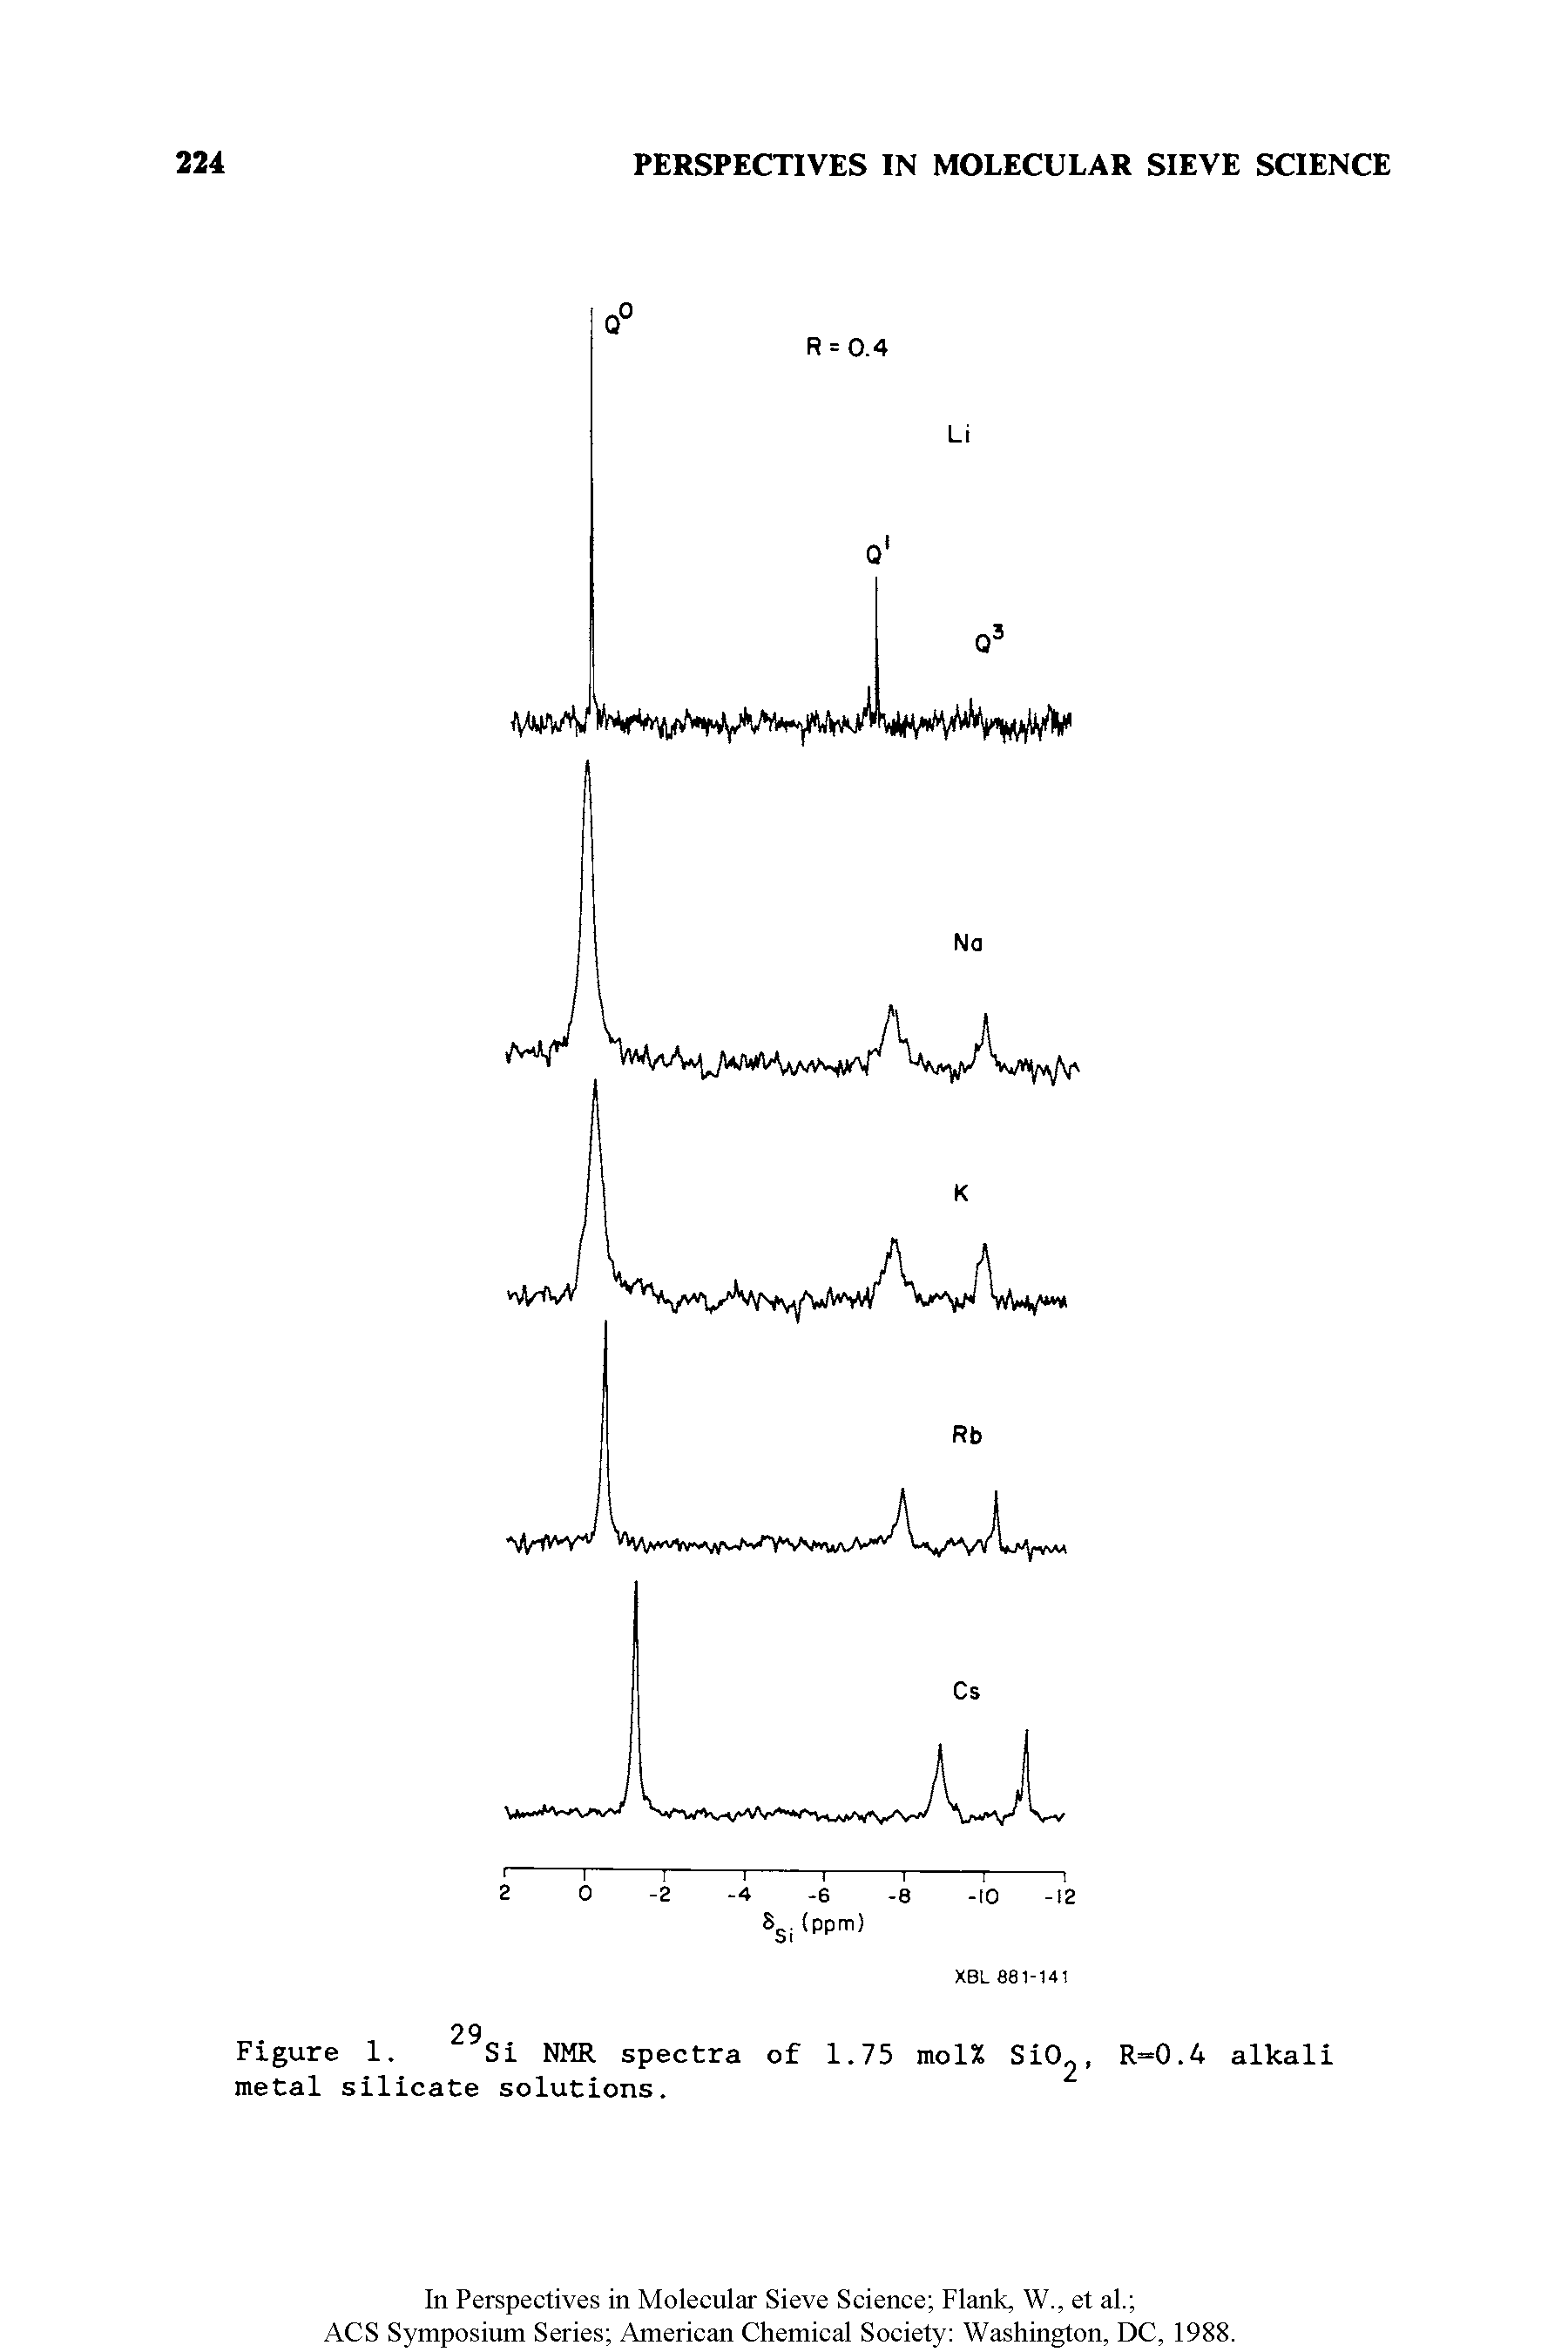 Figure 1. Si NMR spectra of 1.75 mol% SiO, R O.A alkali metal silicate solutions.